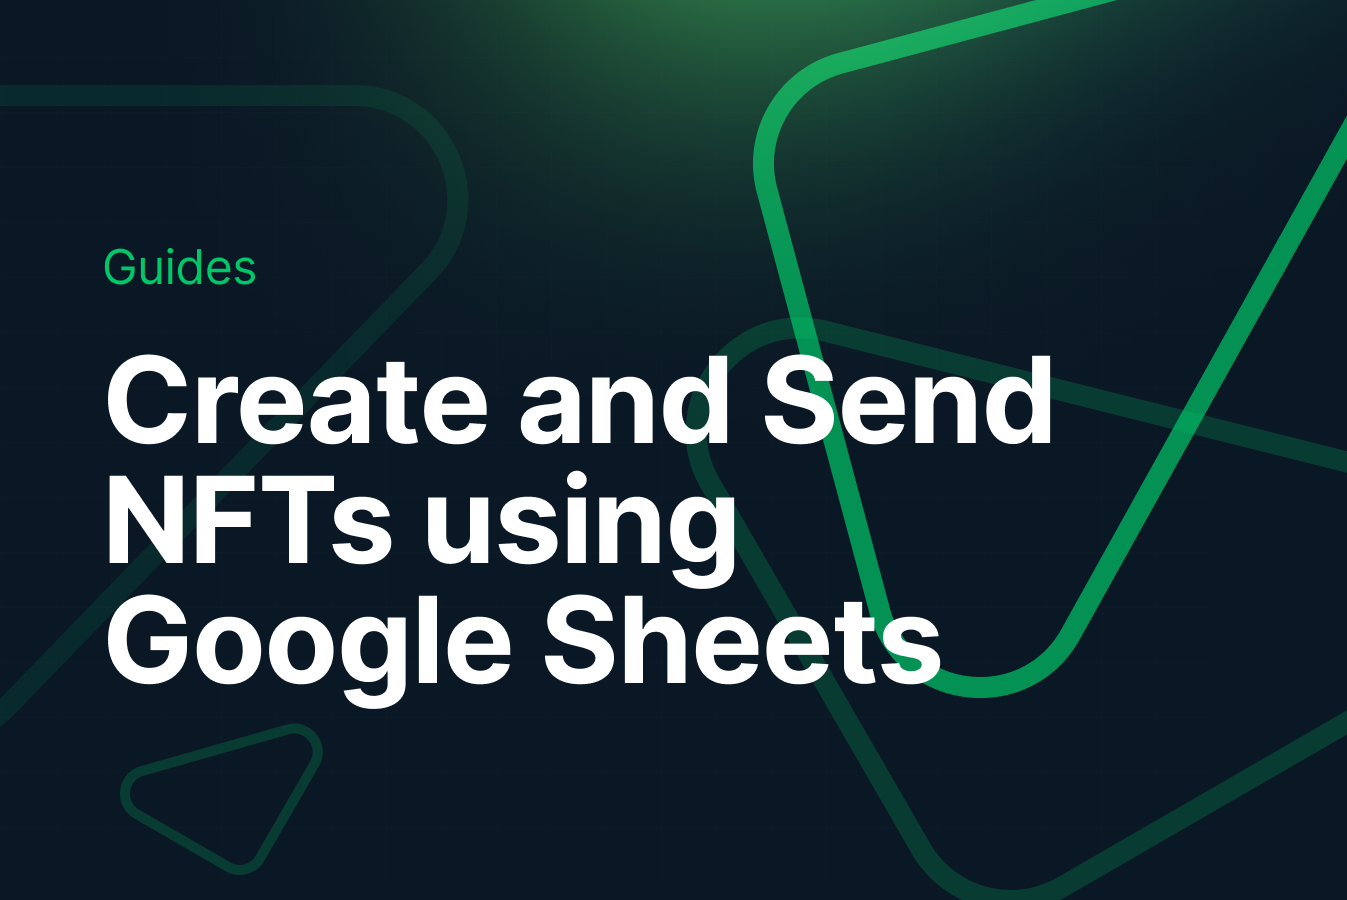 Create and Send NFTs using Google Sheets